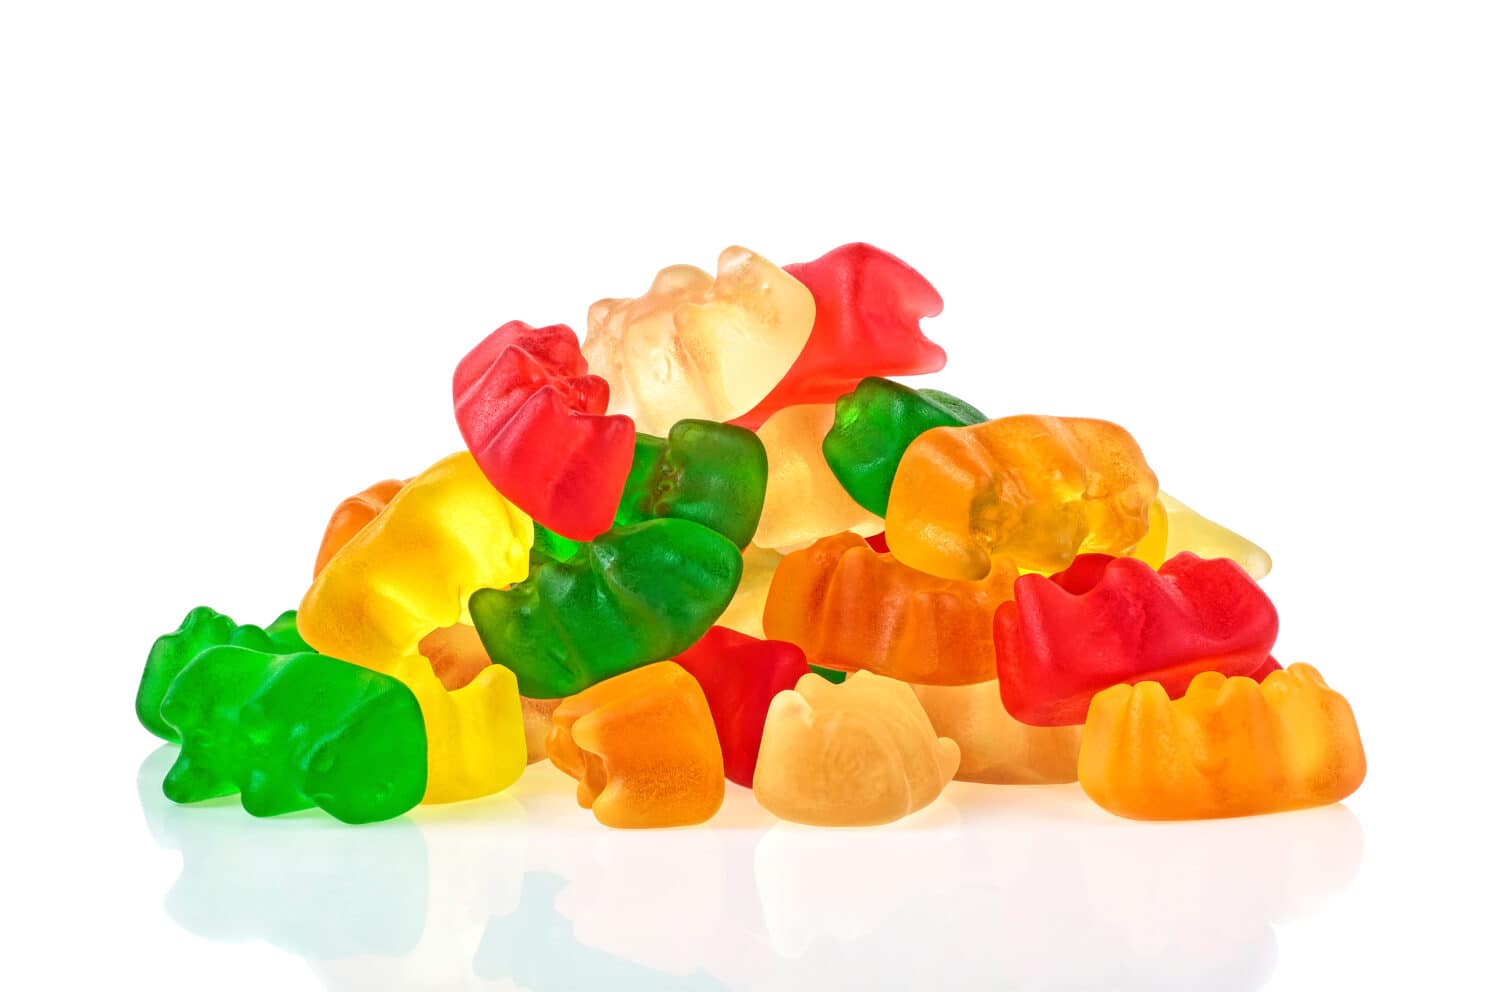 Pile of multicolored jelly bears candy on a white background. Jelly Bean.